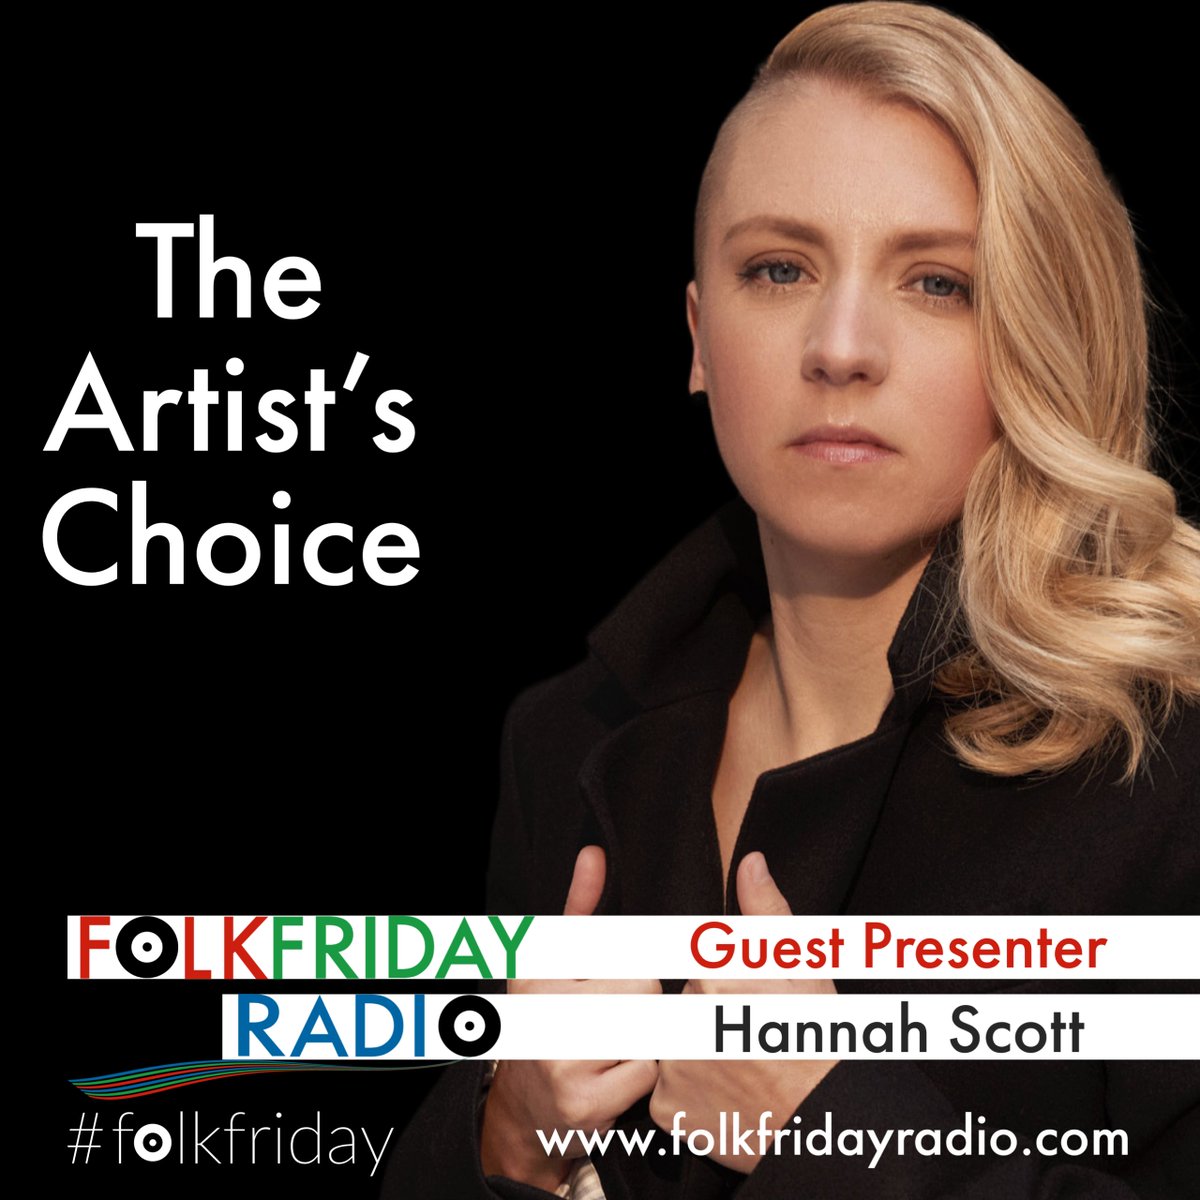 Tomorrow, Thursday the 11th of April, it's Hannah Scott's turn to present The Artist's Choice, the show where artists get an opportunity to show present the music they like and that has influenced them. Listen from 8PM here: folkfridayradio.com